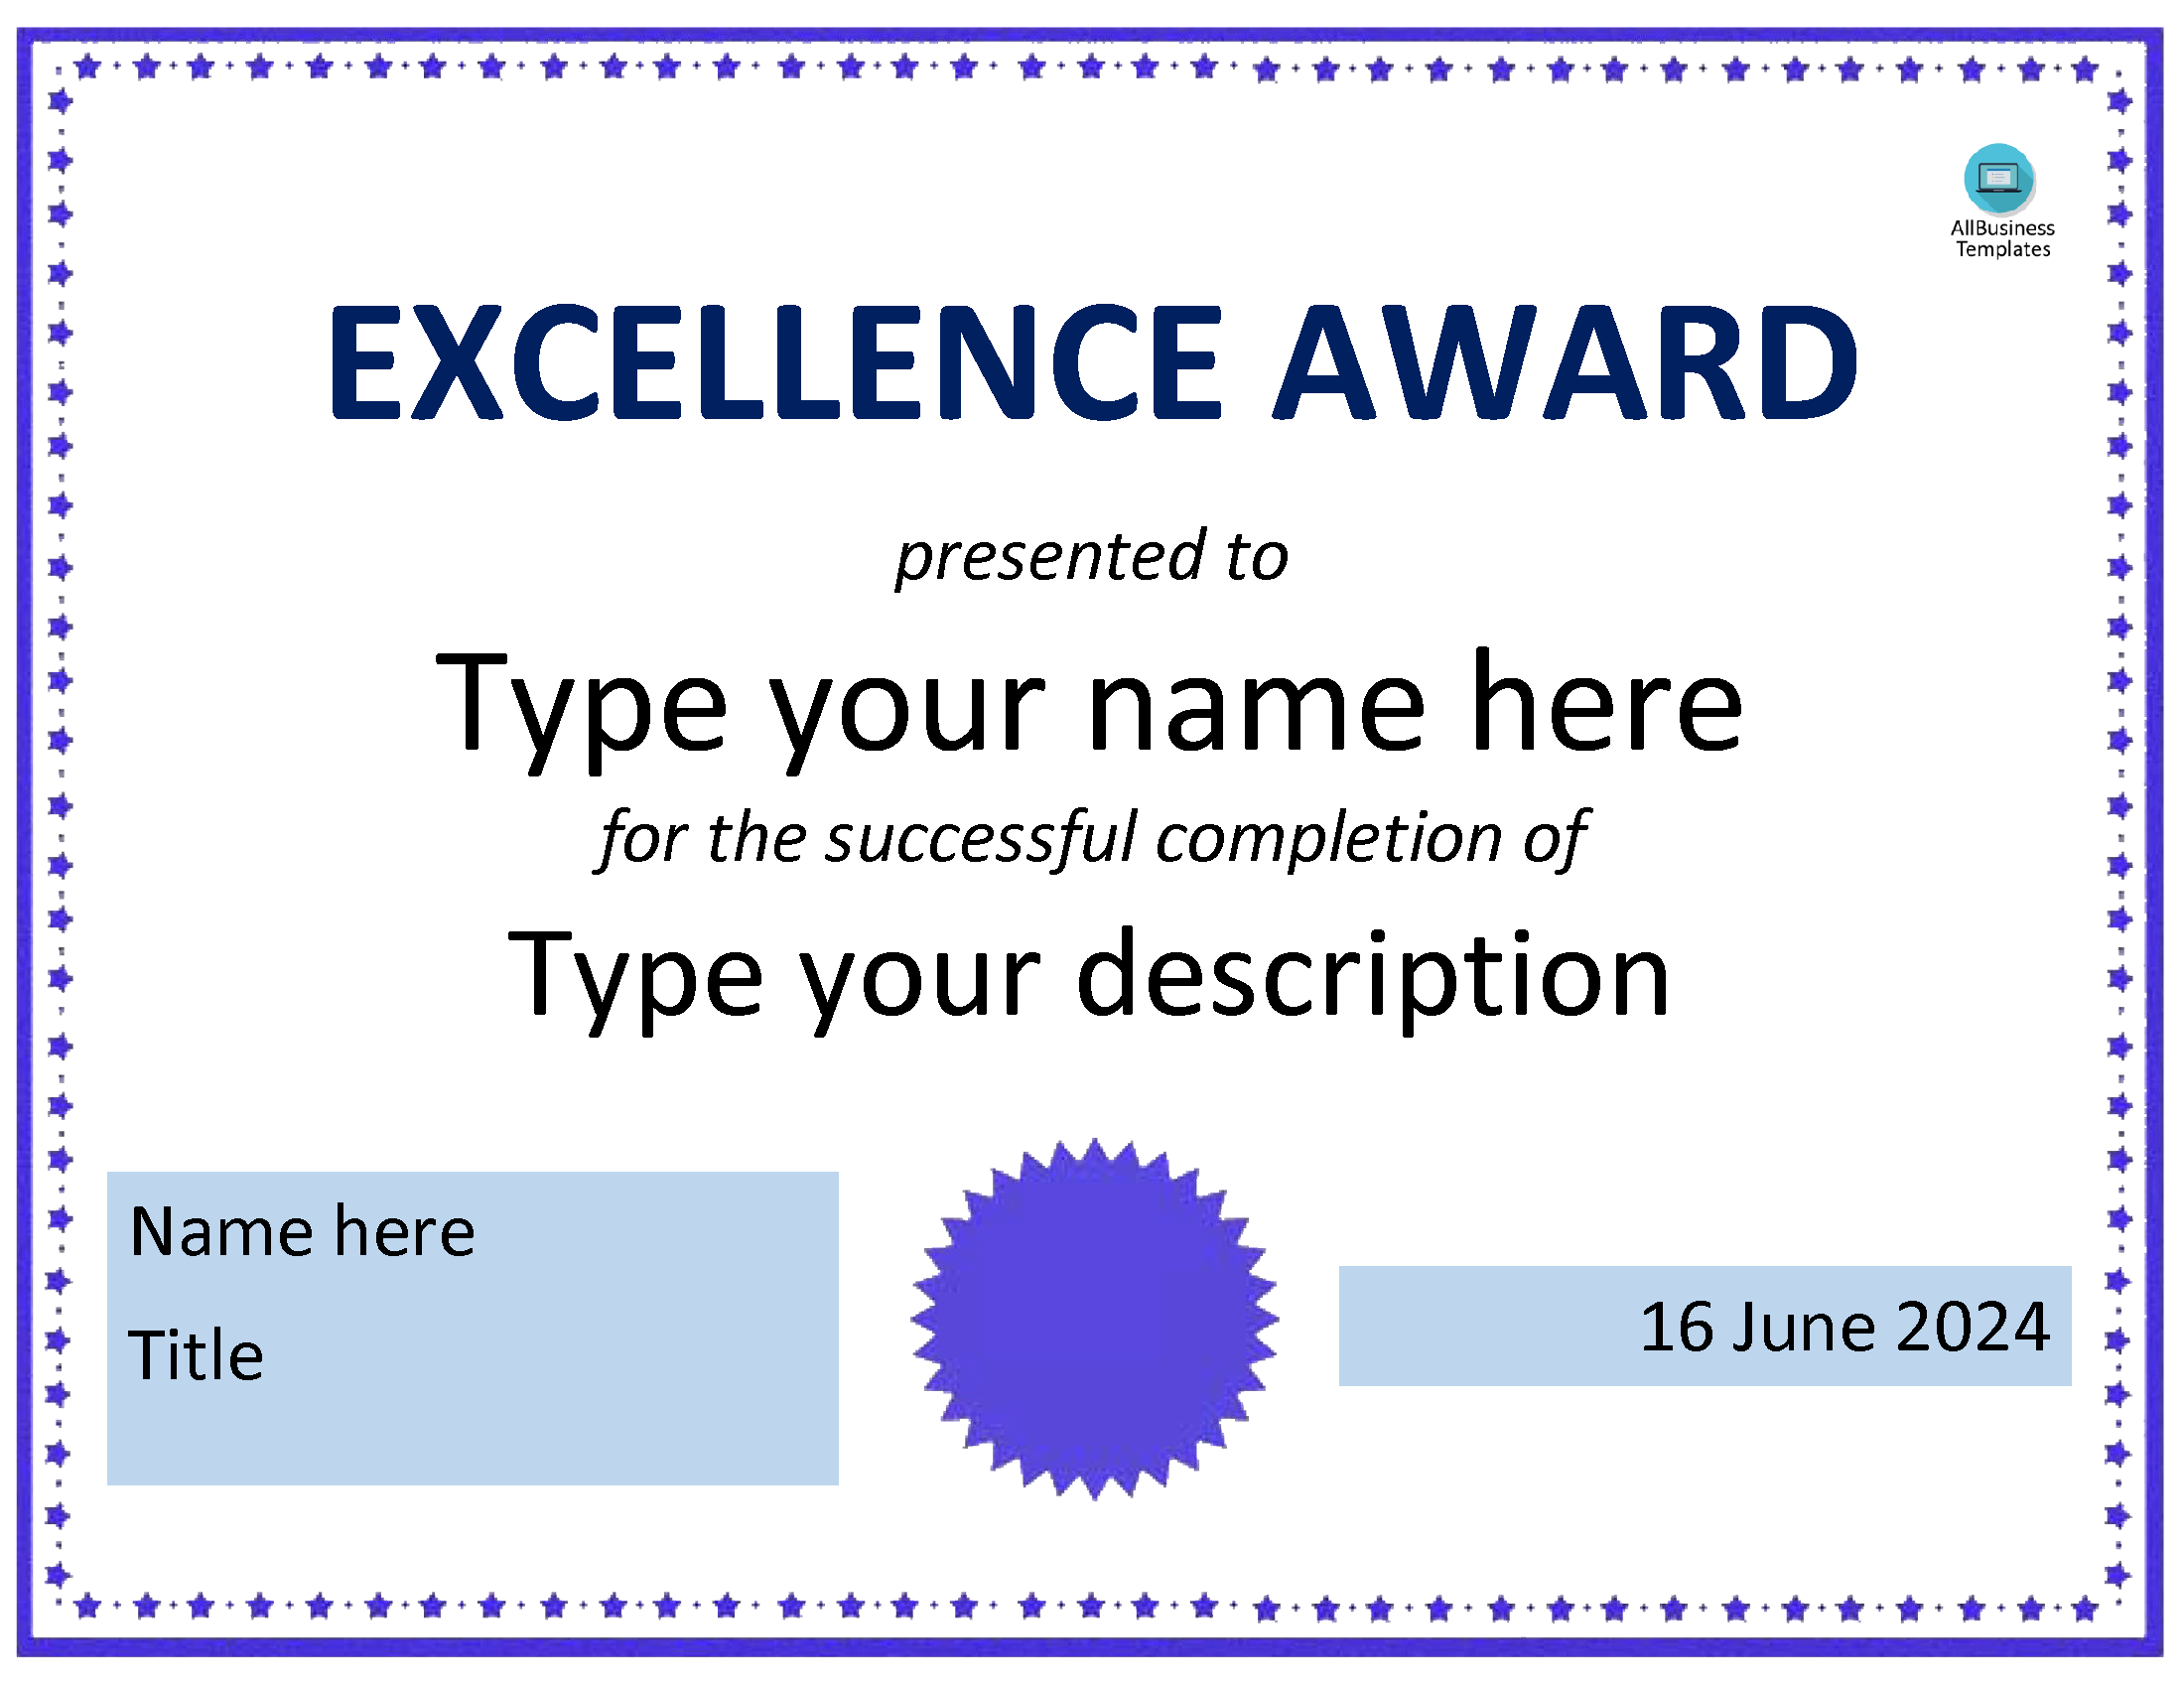 Excellence Award Certificate main image